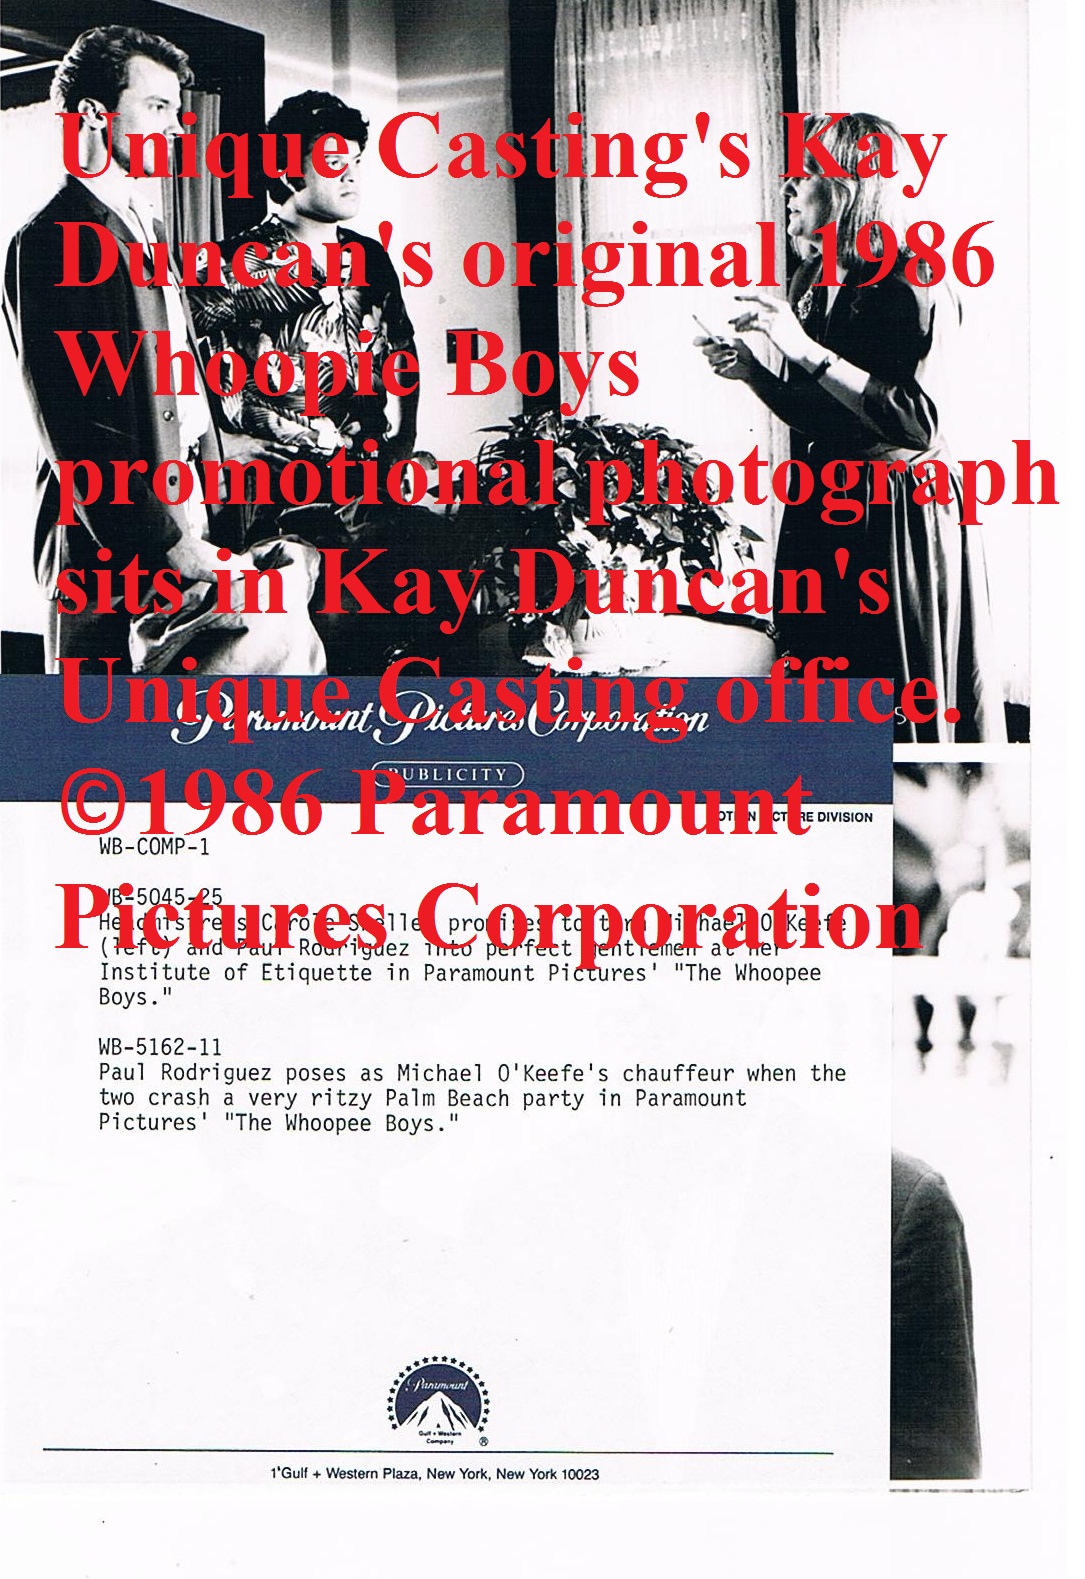 Unique Casting's Original 1986 Whoopie Boys Photo from ©1986 Paramount Pictures Corporation. The original photograph sits in Kay Duncan's Unique Casting office.